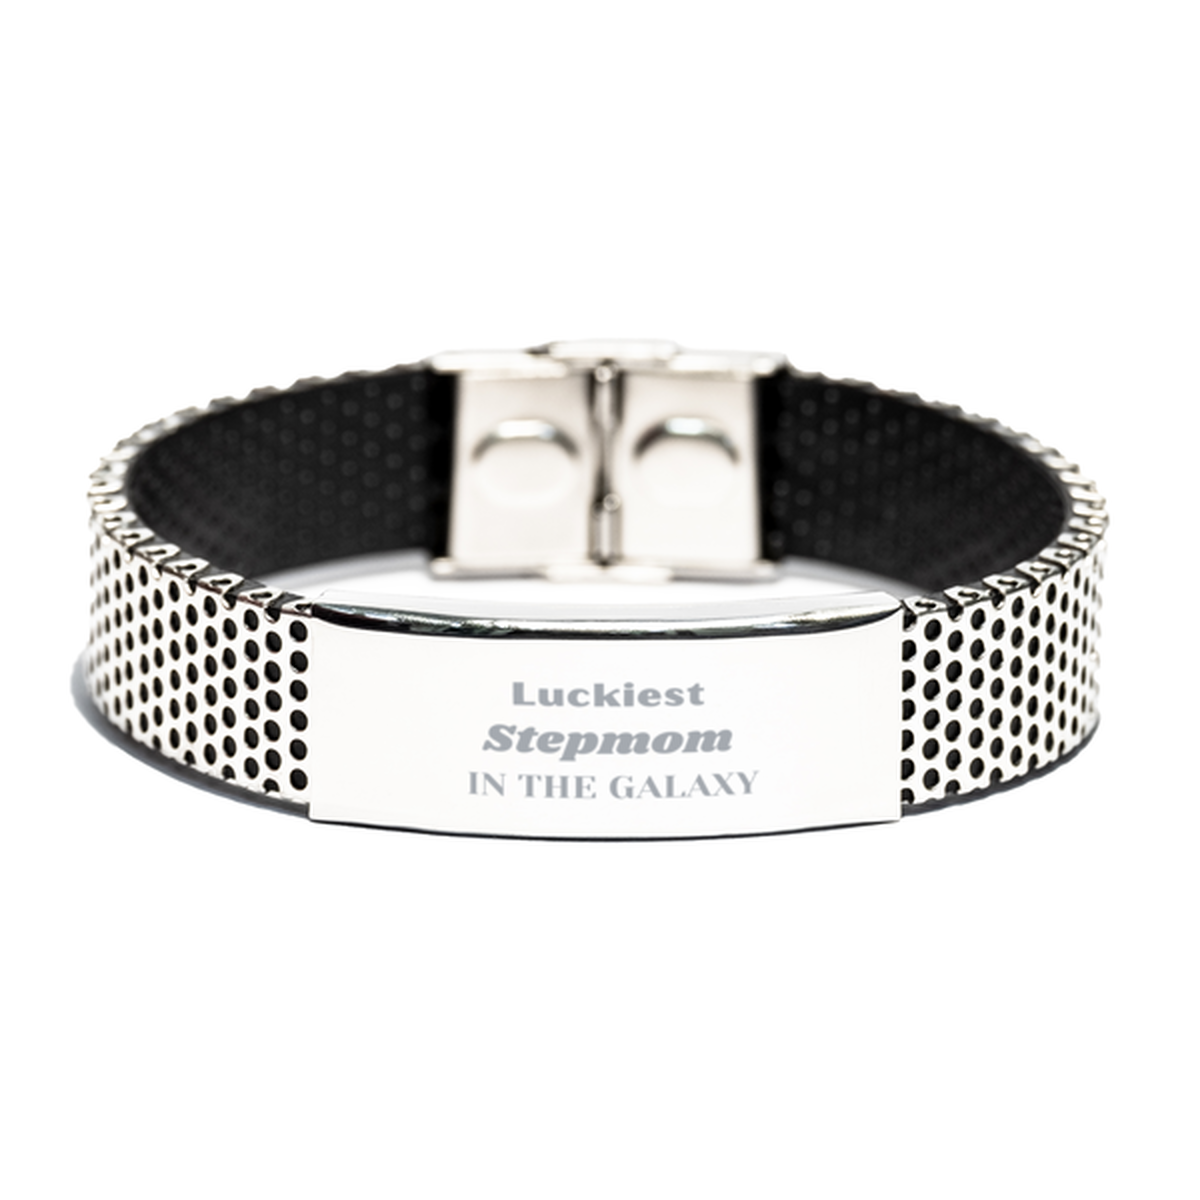 Luckiest Stepmom in the Galaxy, To My Stepmom Engraved Gifts, Christmas Stepmom Stainless Steel Bracelet Gifts, X-mas Birthday Unique Gifts For Stepmom Men Women